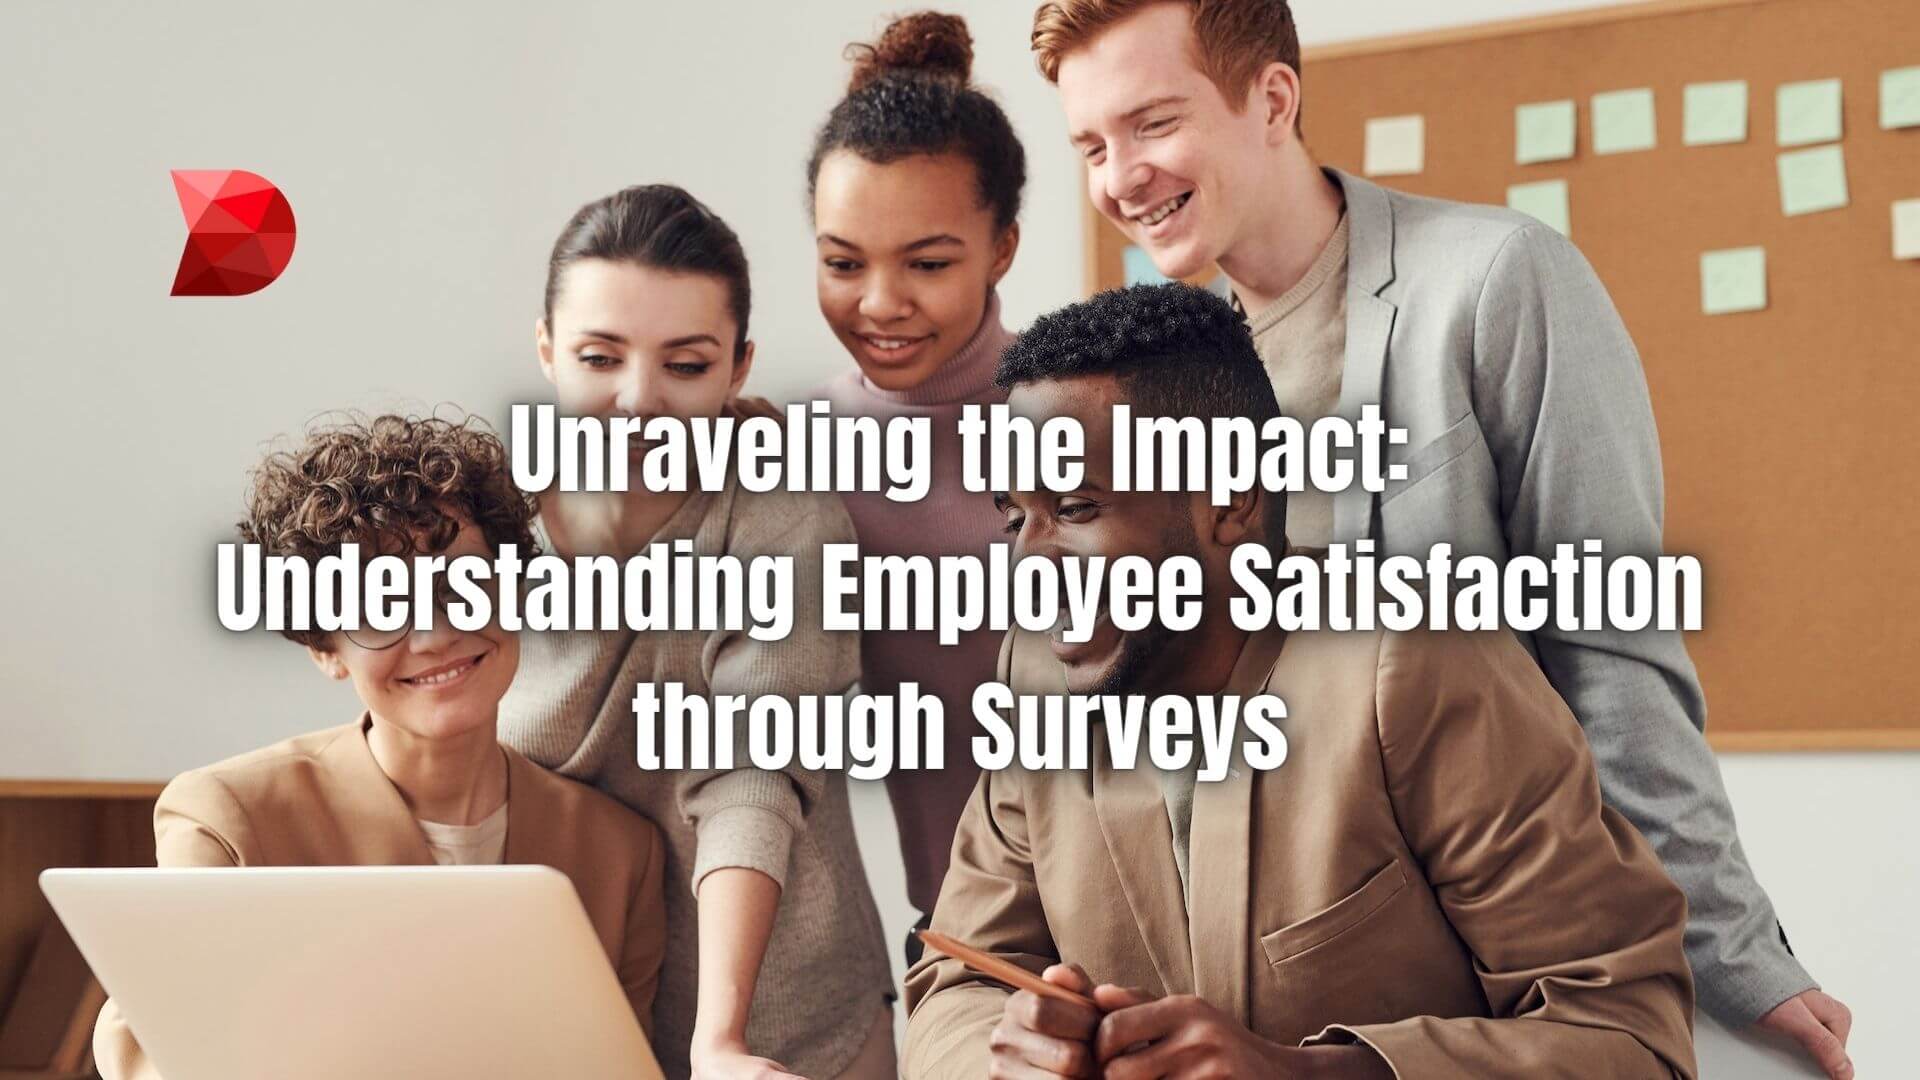 Creating an employee satisfaction survey template helps gauge employees' sentiments and identify improvement areas. Click here to learn how!